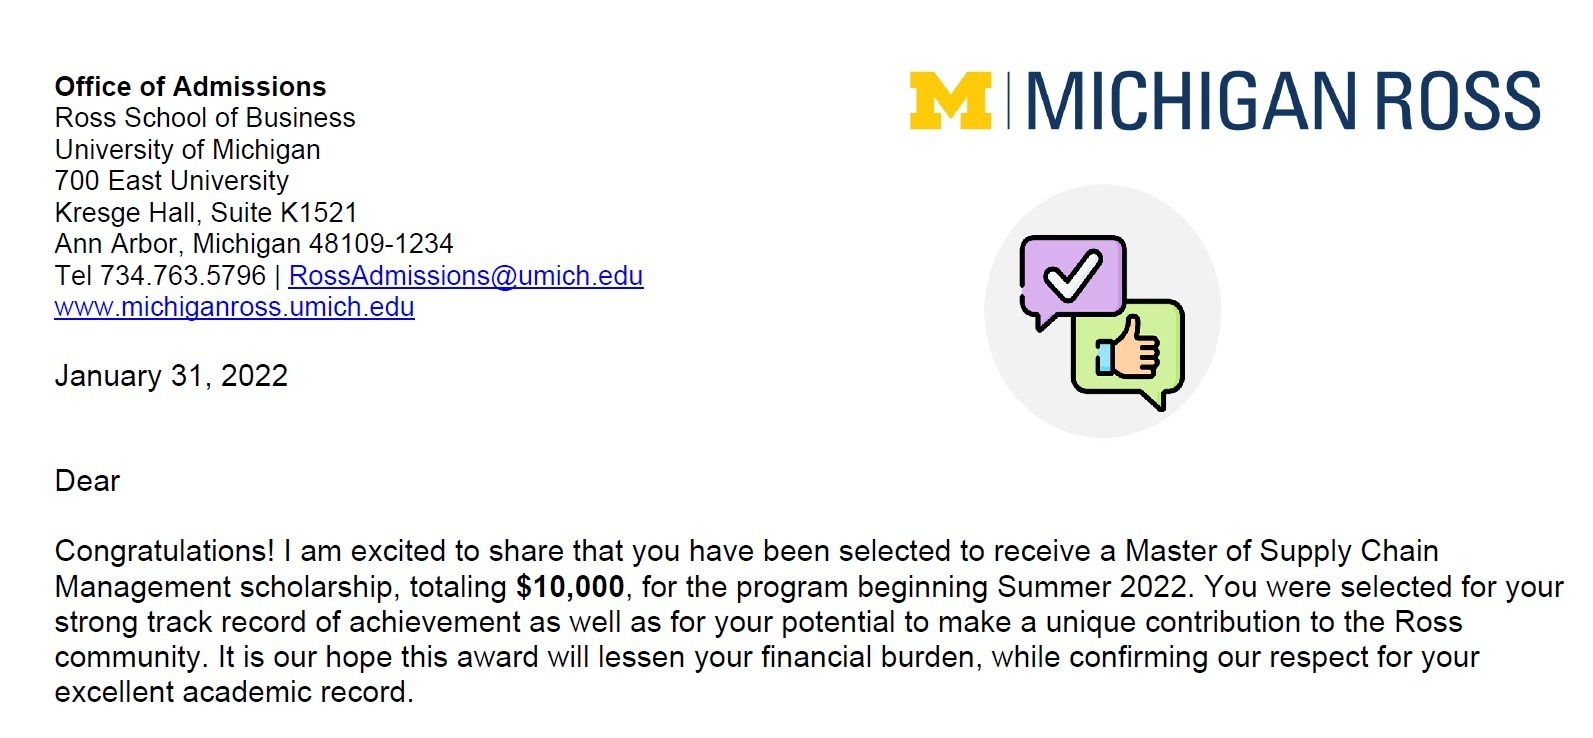 UMich_Offer (with icon)